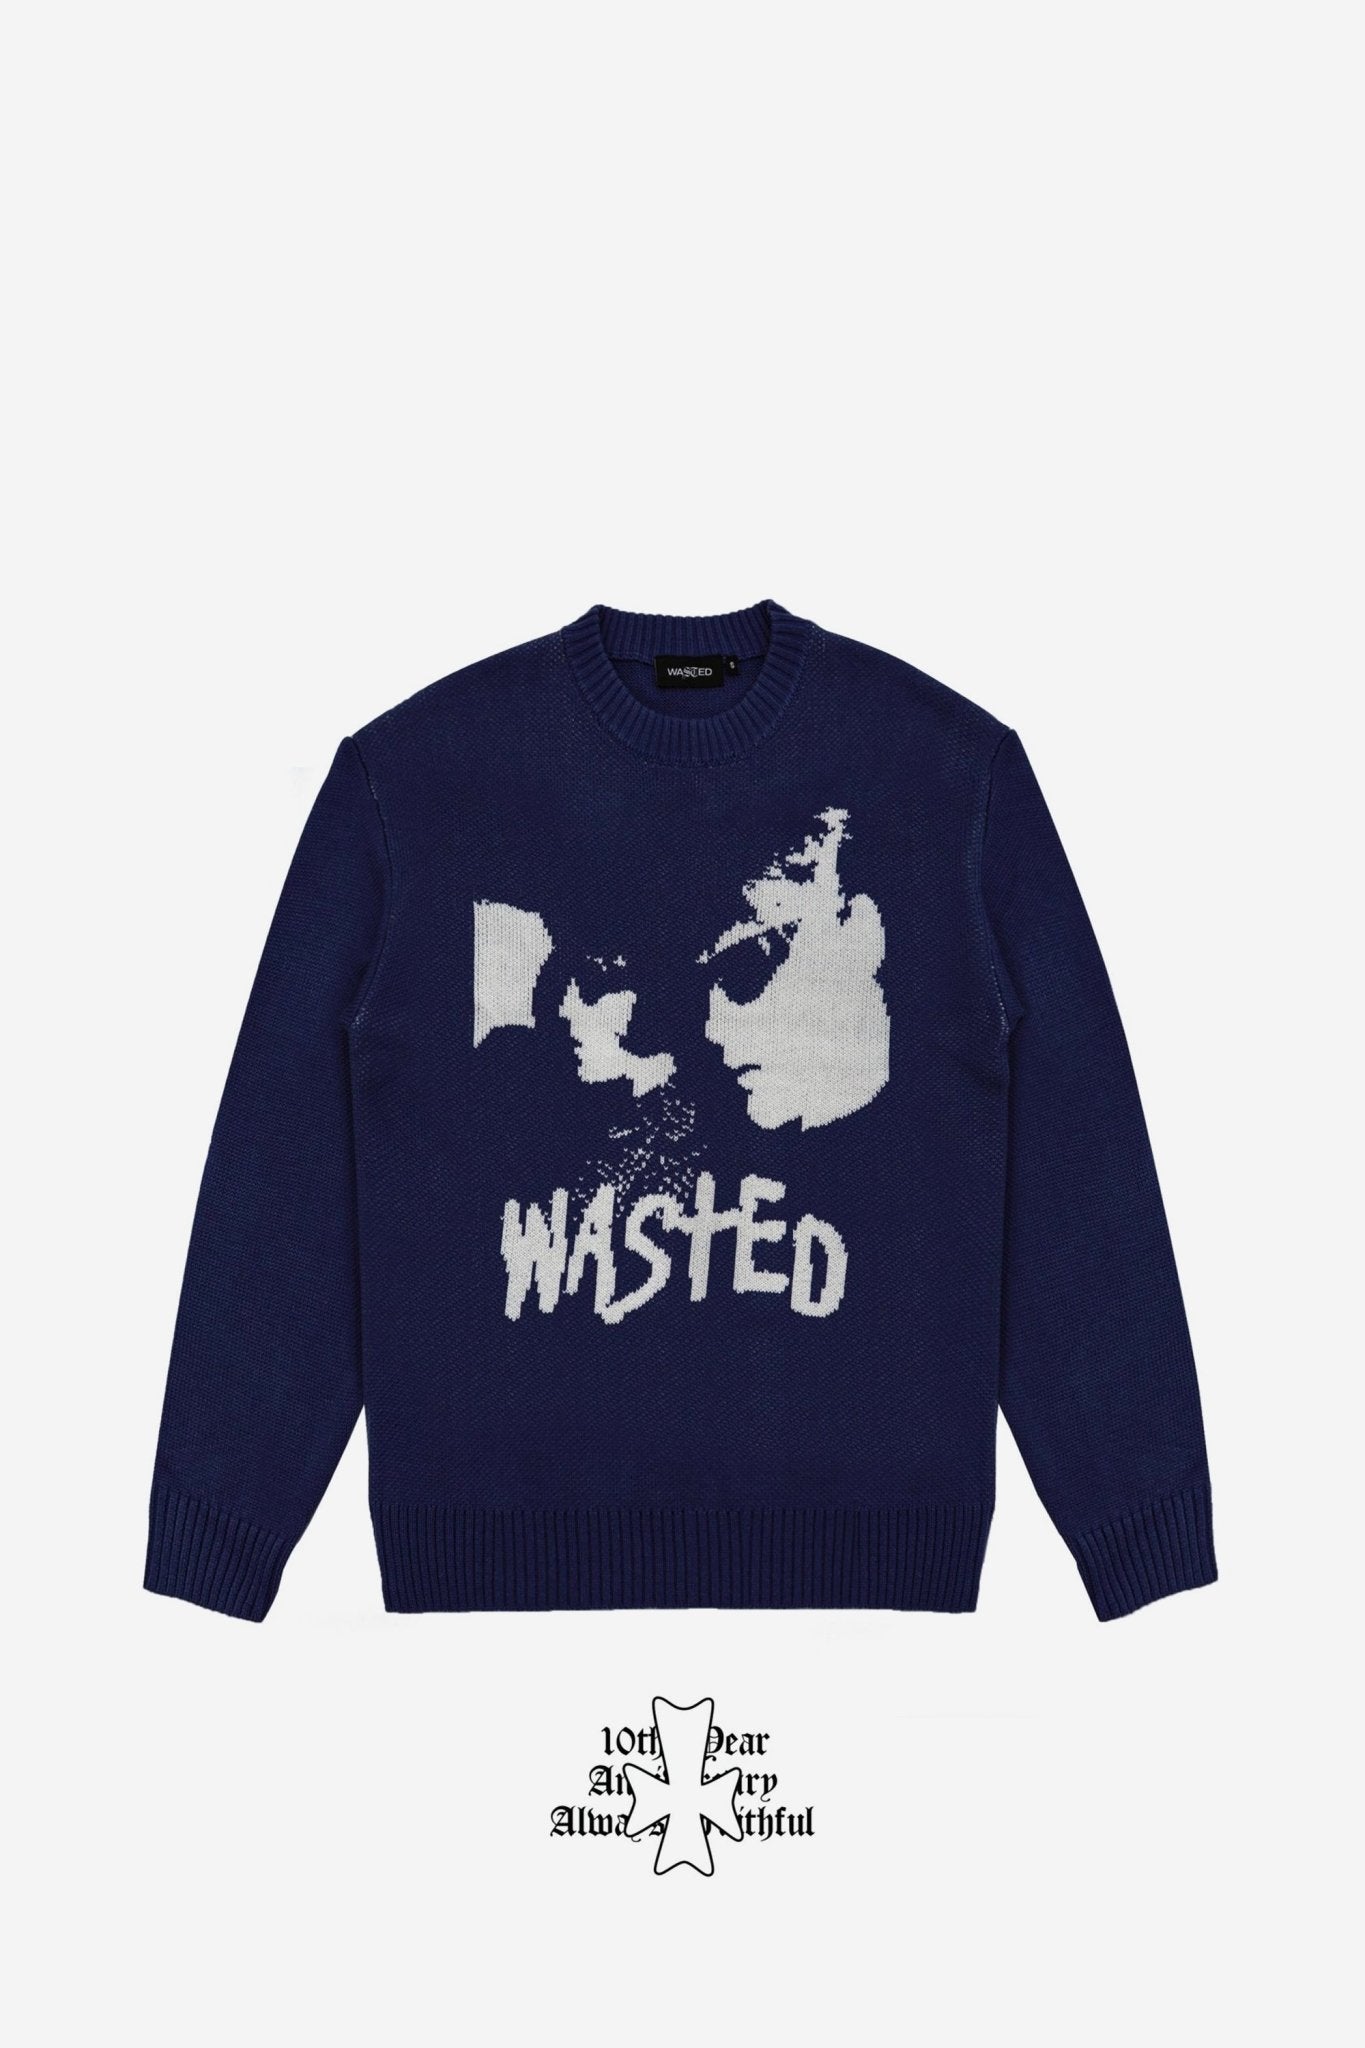 Wasted Youth Knit